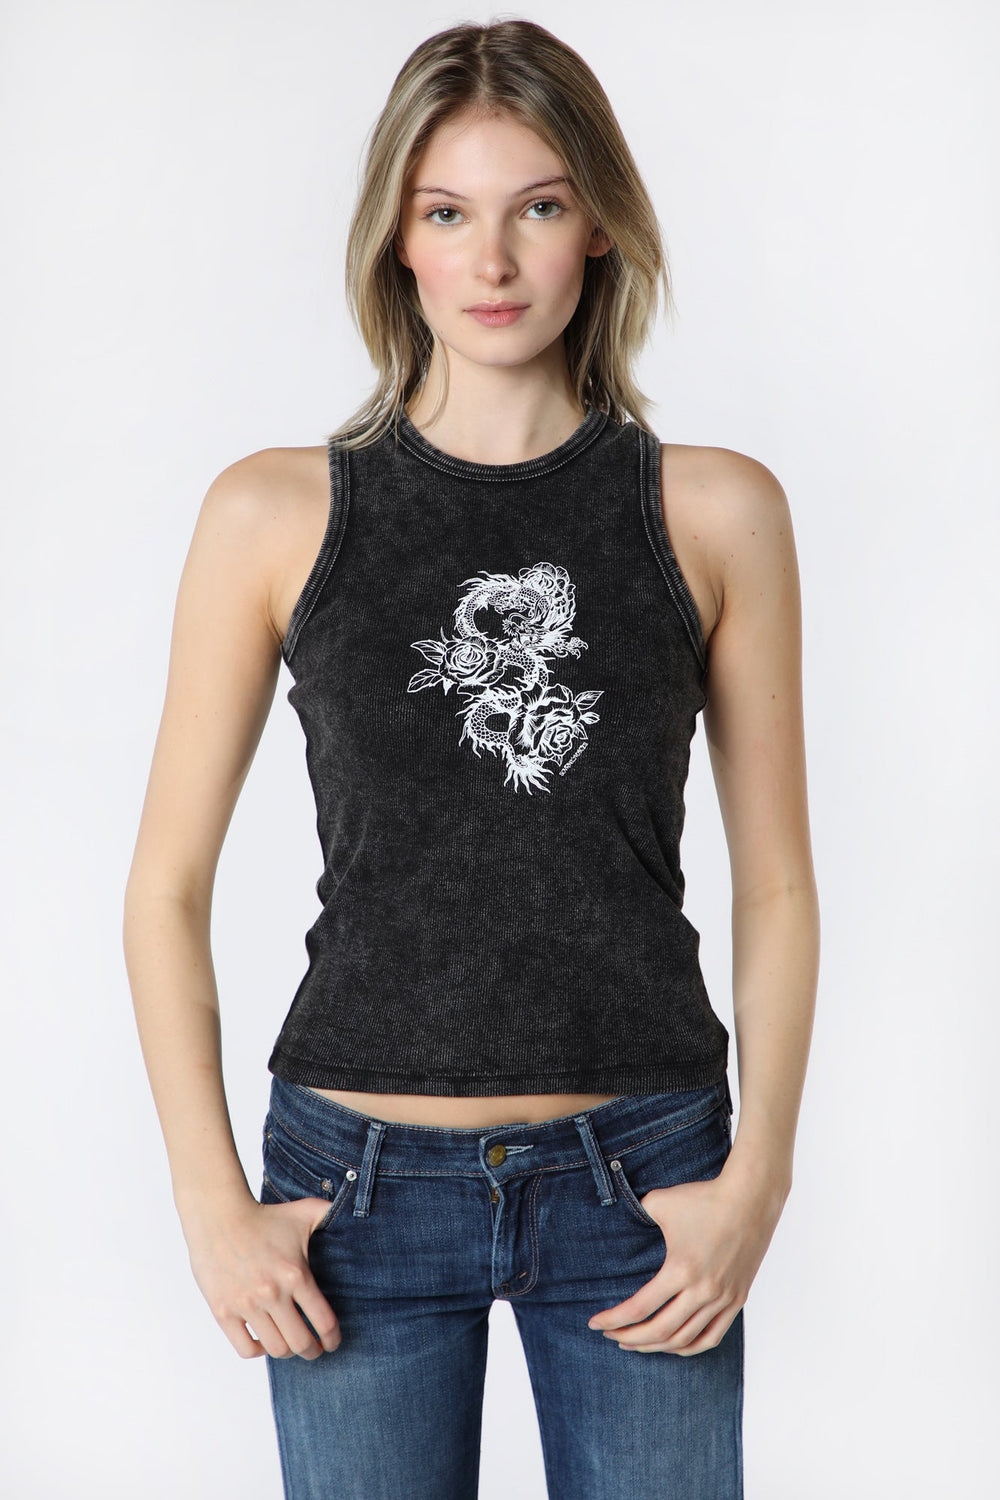 Womens Sovrn Voices Cropped Tank Top Womens Sovrn Voices Cropped Tank Top